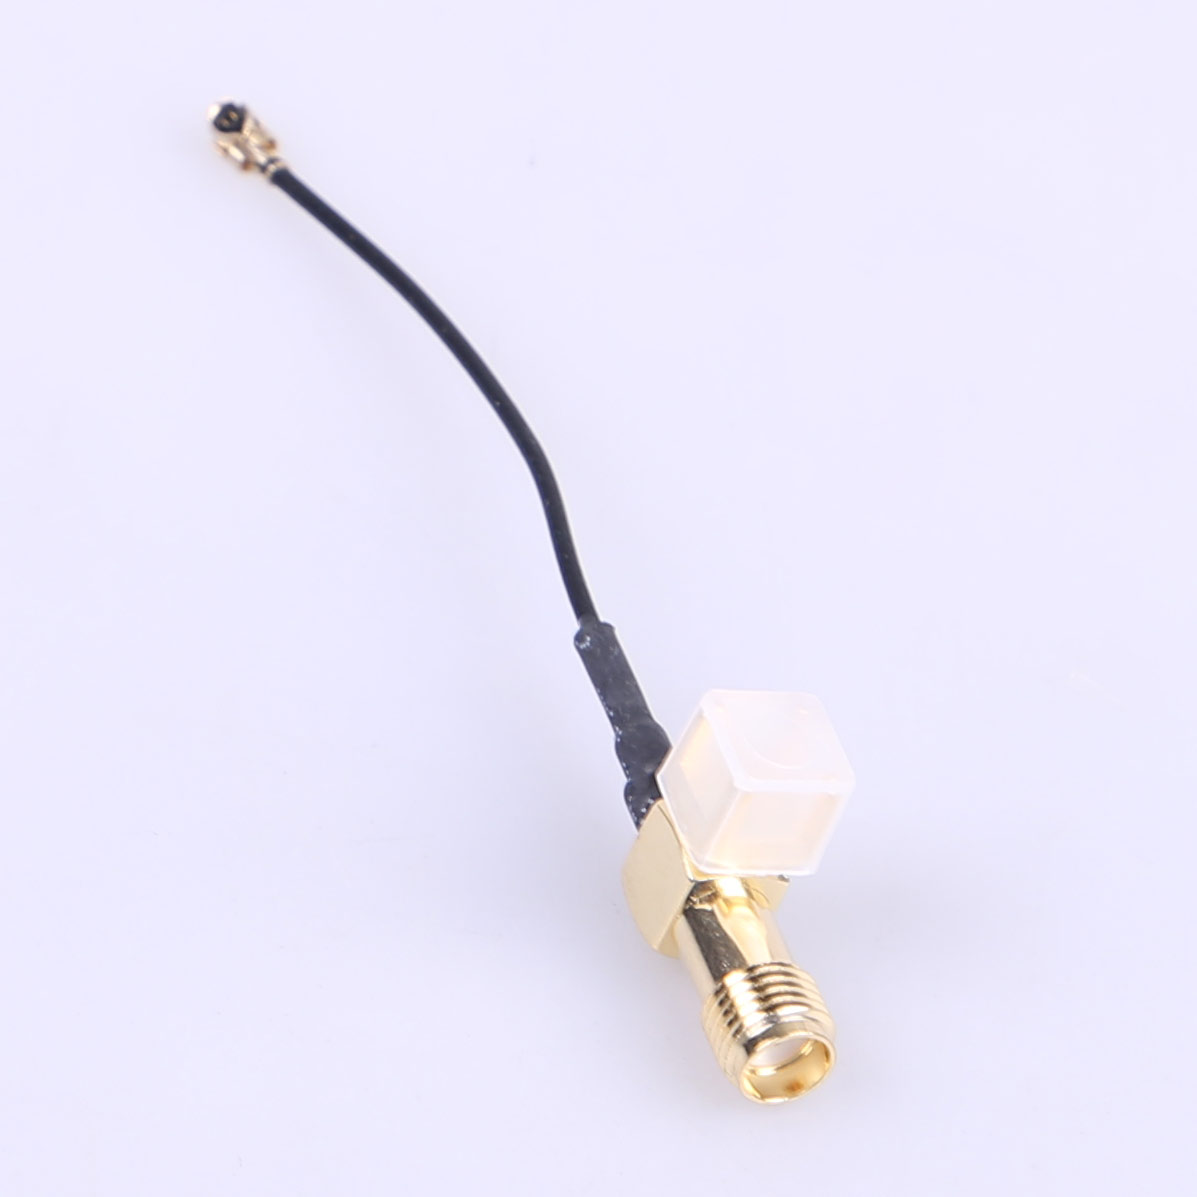 Kinghelm Coaxial connector IPEX to SMA antenna adapter cable welded I-PEX 11mm screw - KH-IPEXA-SMAKWE-B060H